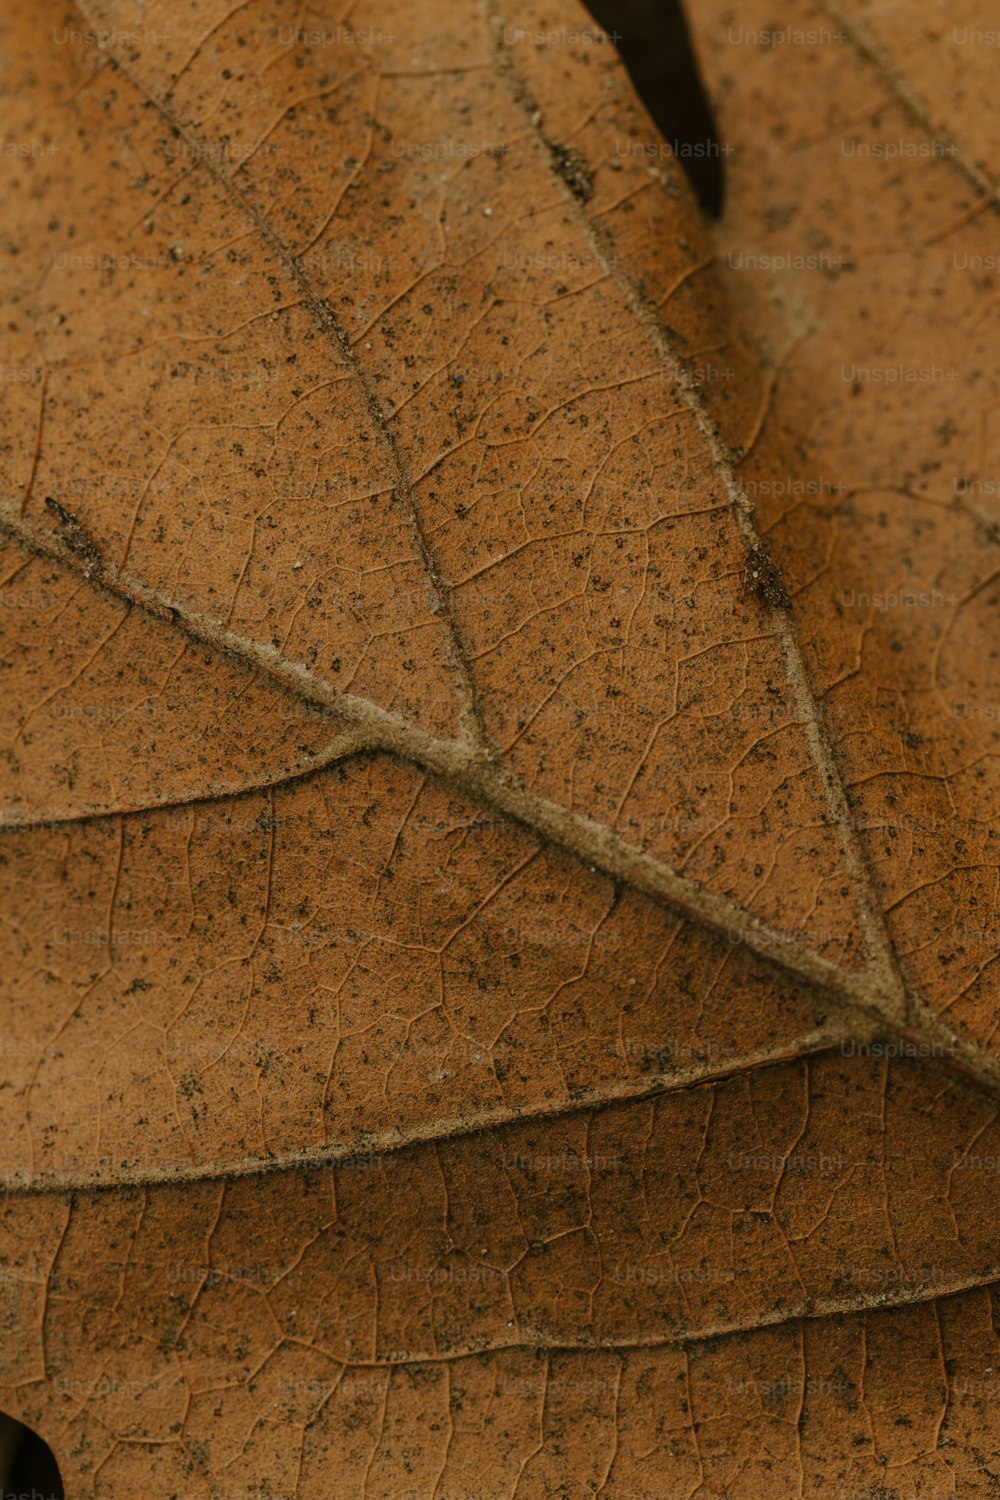 a close up of a brown leaf with small dots